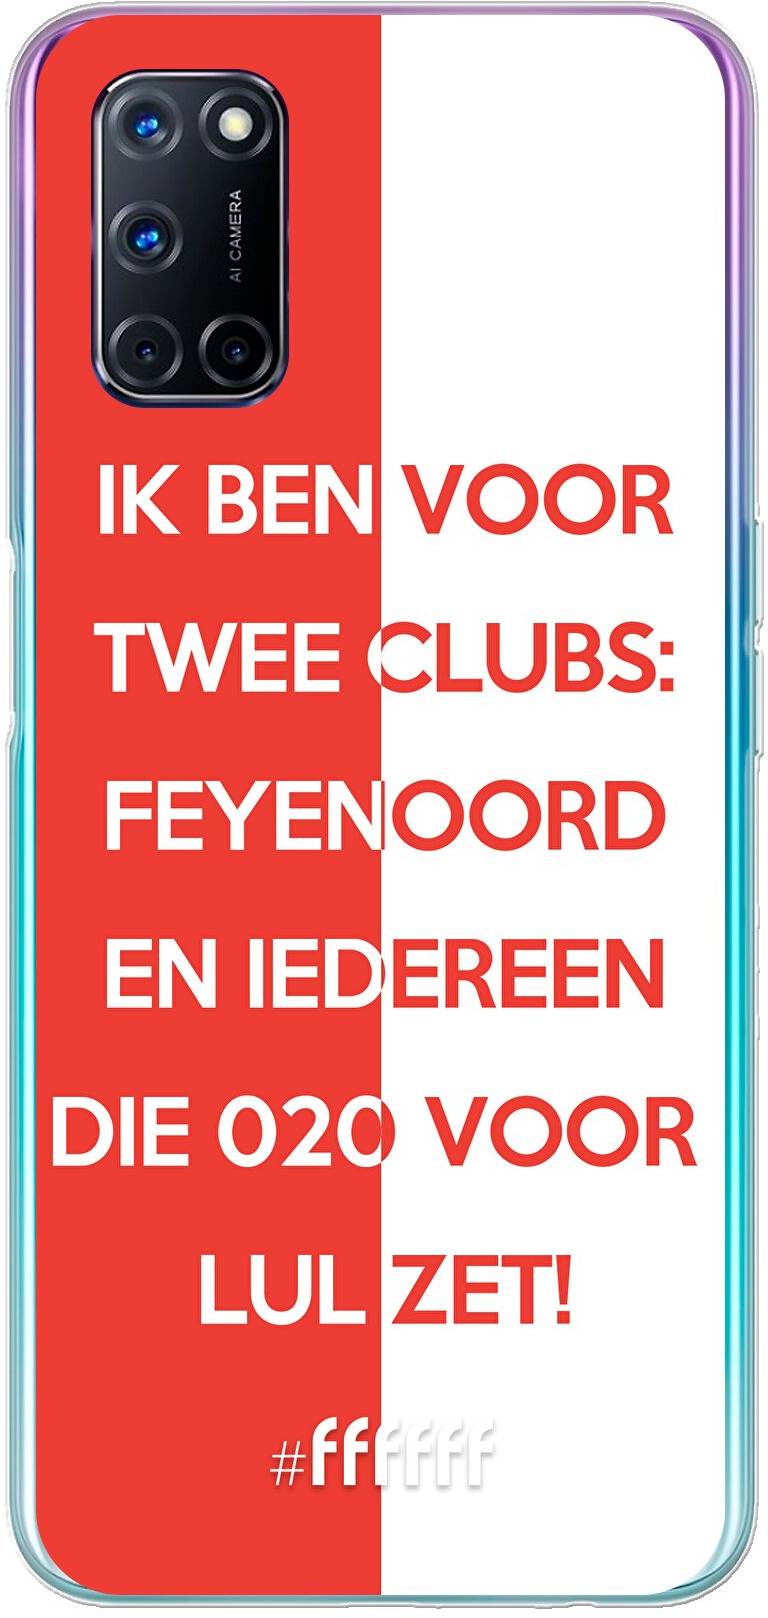 Feyenoord - Quote A72